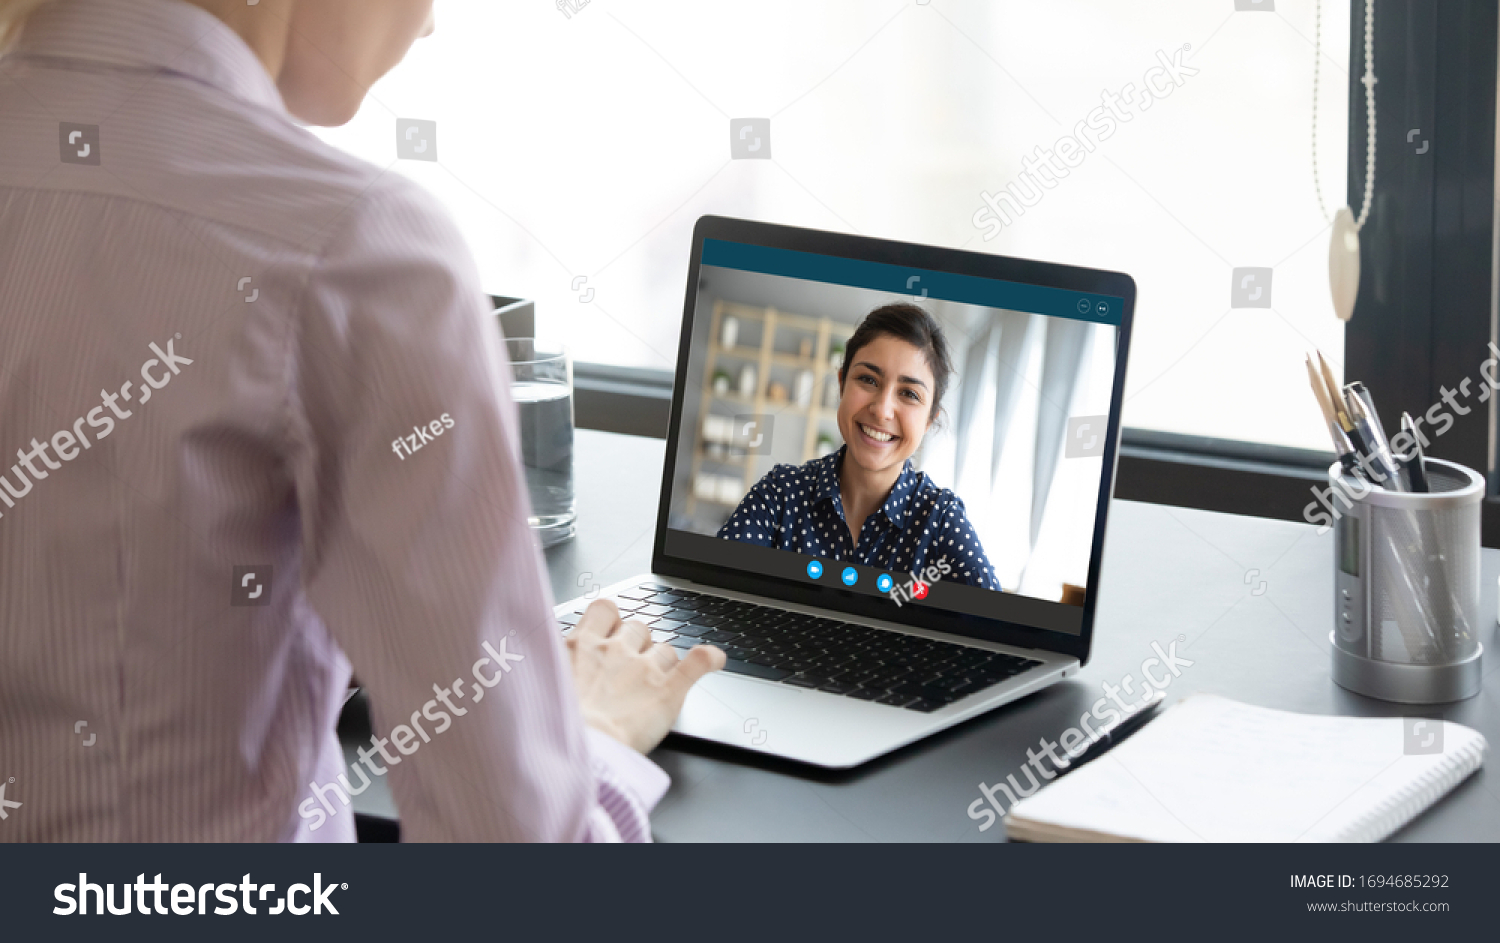 Indian girl communicate with friend on-line by video call, pc screen view over female shoulder. Mental health expert online therapy, colleagues work on common project use videoconferencing app concept #1694685292